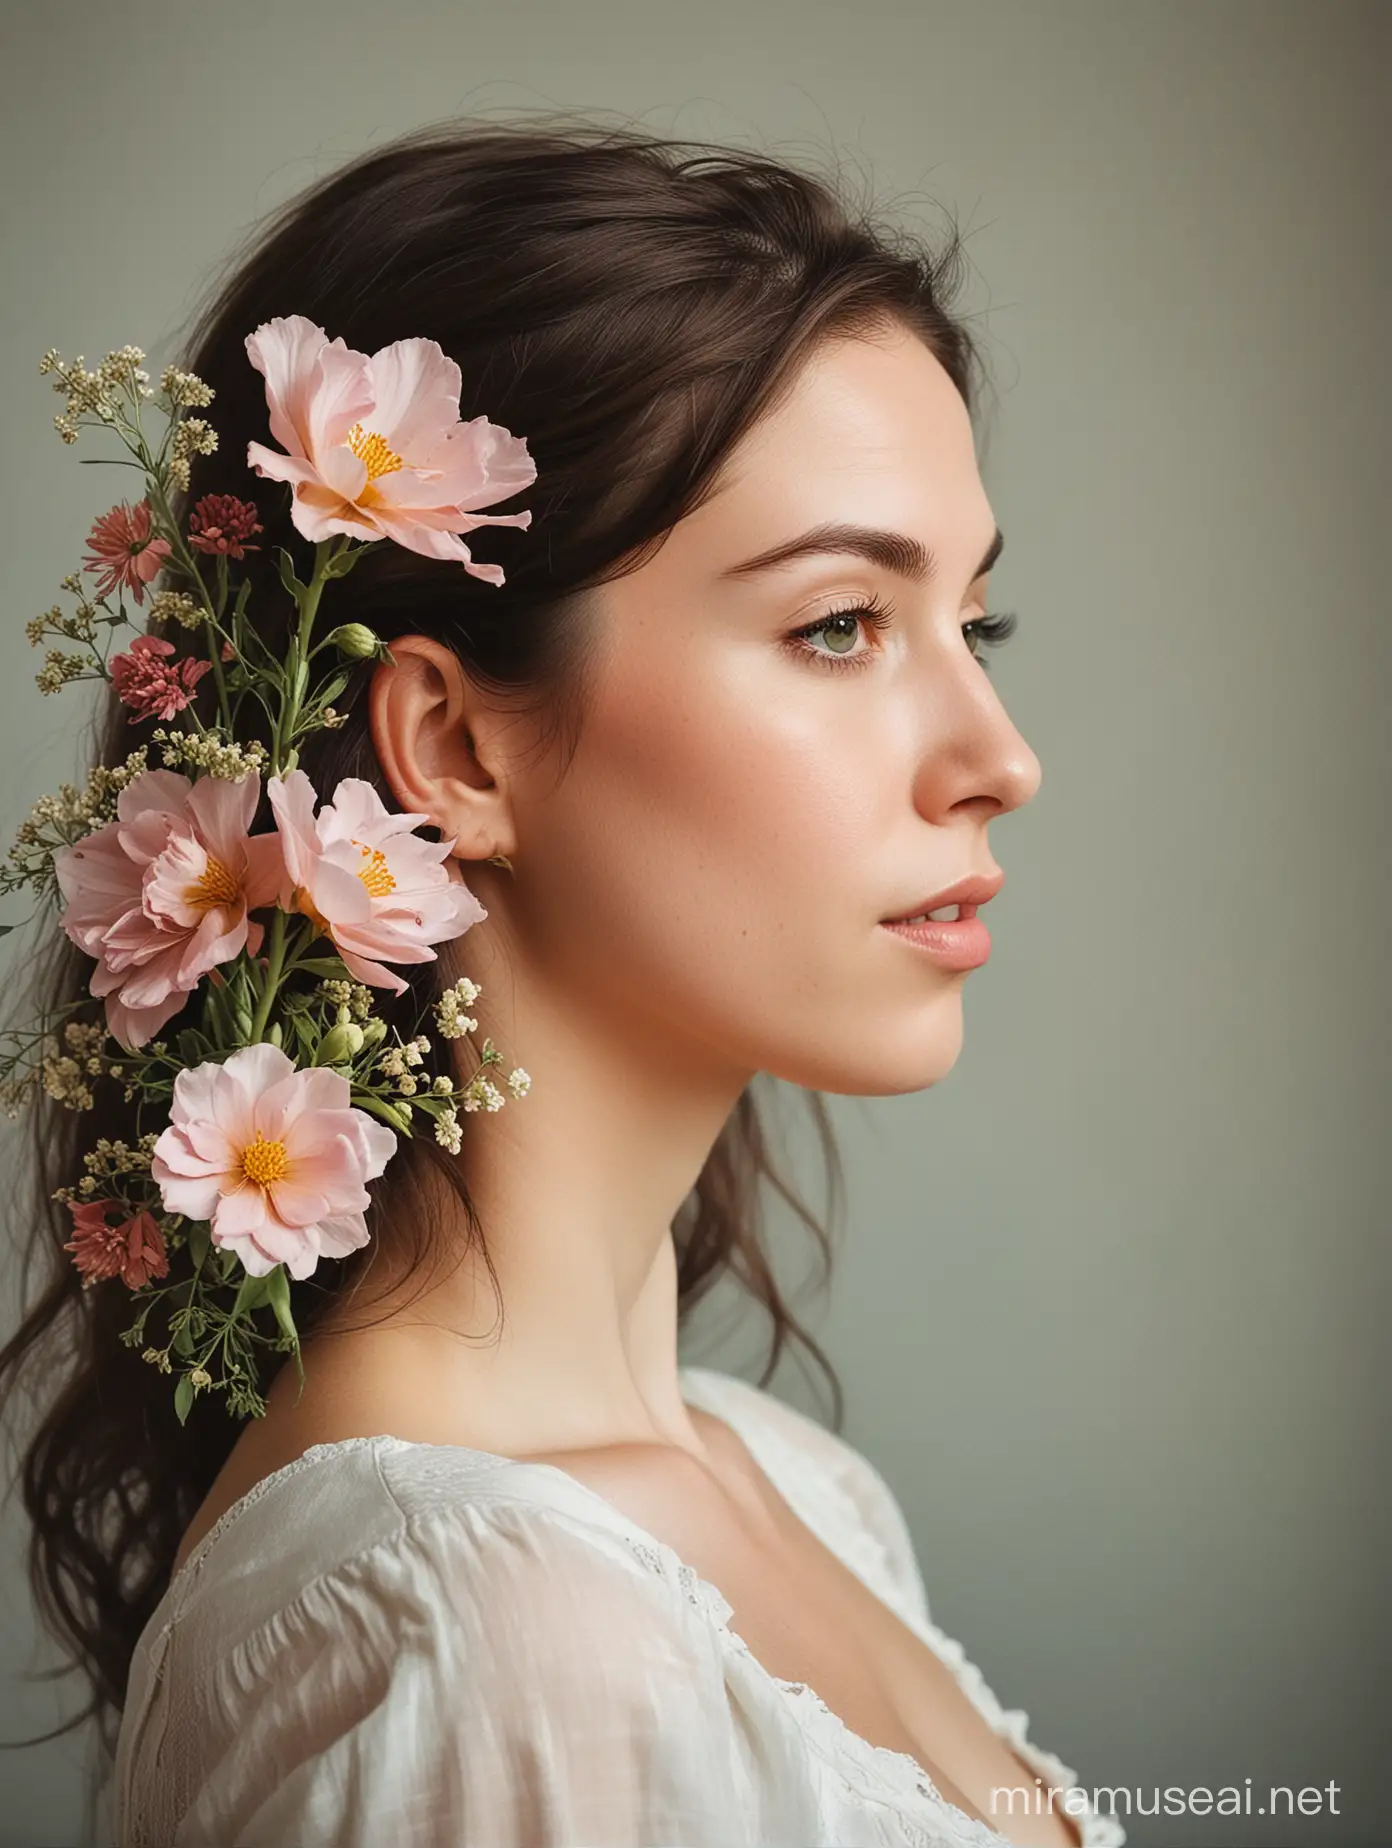 Portrait of Woman with SemiProfile Surrounded by Flowers